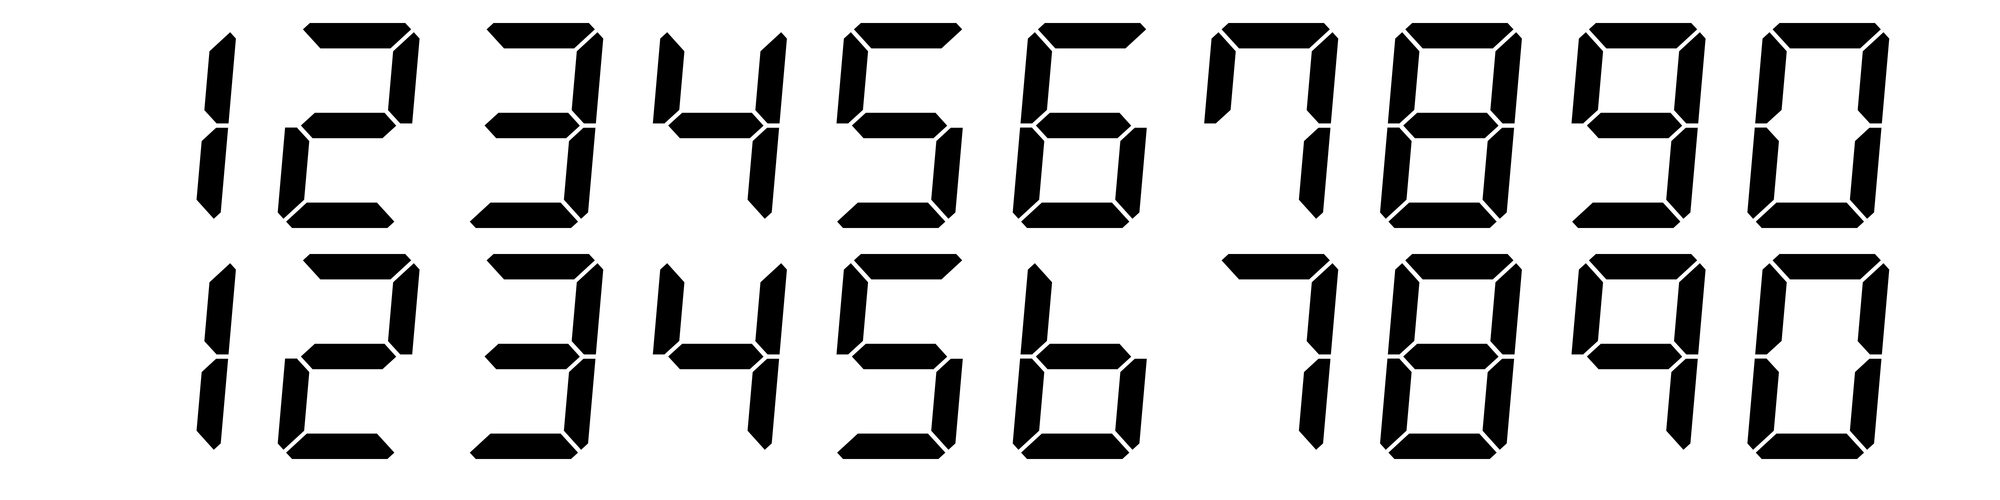 Two rows of the digits 1 to 0 in a seven-segment style typeface. The top row has the top segment on the 6, a serif on the 7, and the bottom segment on the 9, which have been taken out on the lower version.